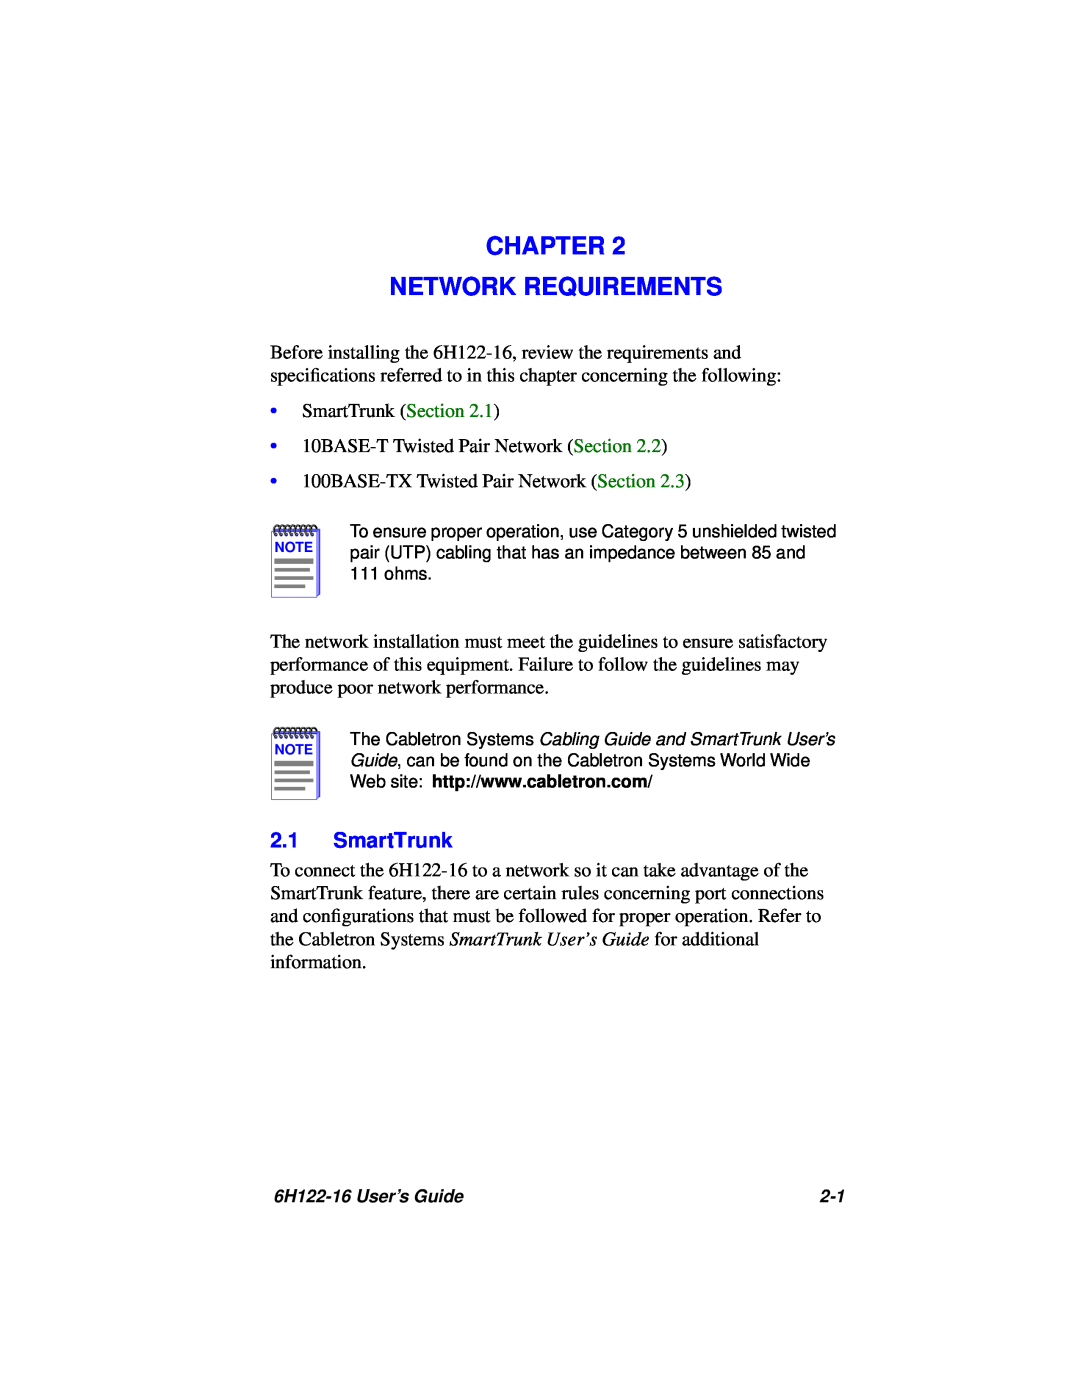 Cabletron Systems 6H122-16 manual Chapter Network Requirements, SmartTrunk 